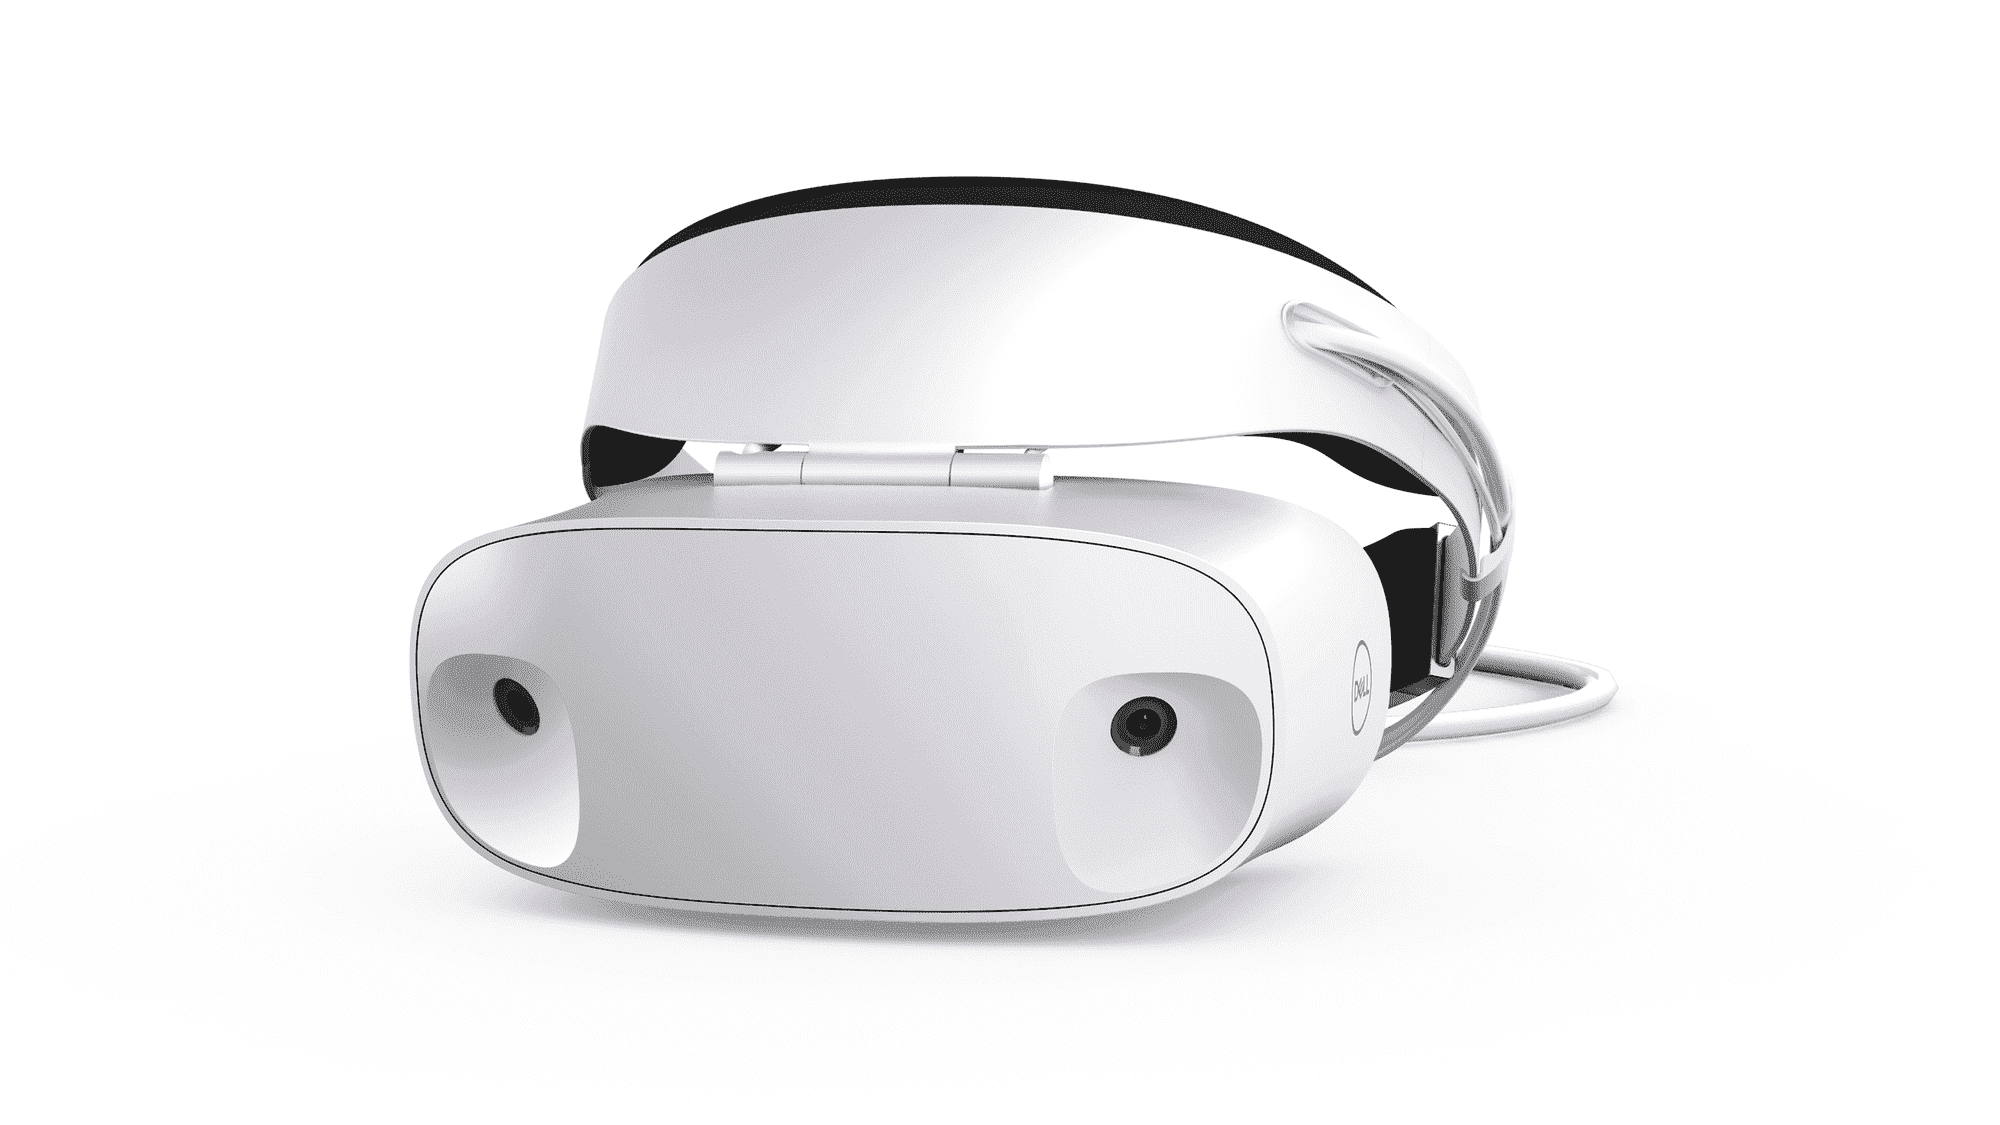 Samsung HMD Odyssey+ is a new Windows Mixed Reality headset 9cee6486379e283bc39d8c5ab8826163.png